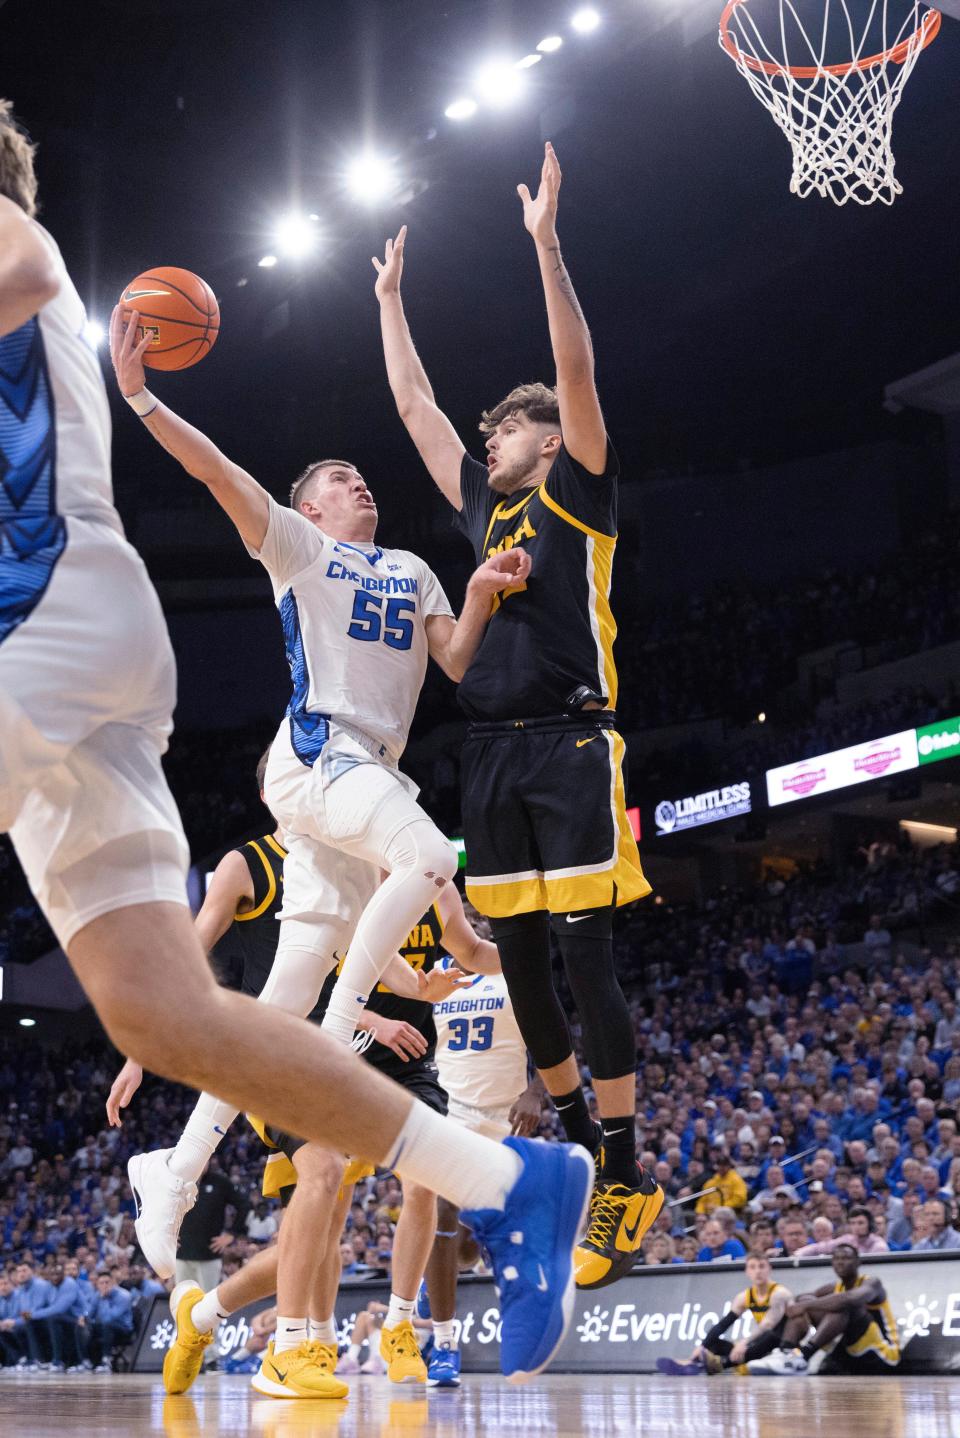 Creighton's Baylor Scheierman, left, who averages averaging 7.9 rebounds a game, drives to the basket during a nonleague game against Iowa in November.